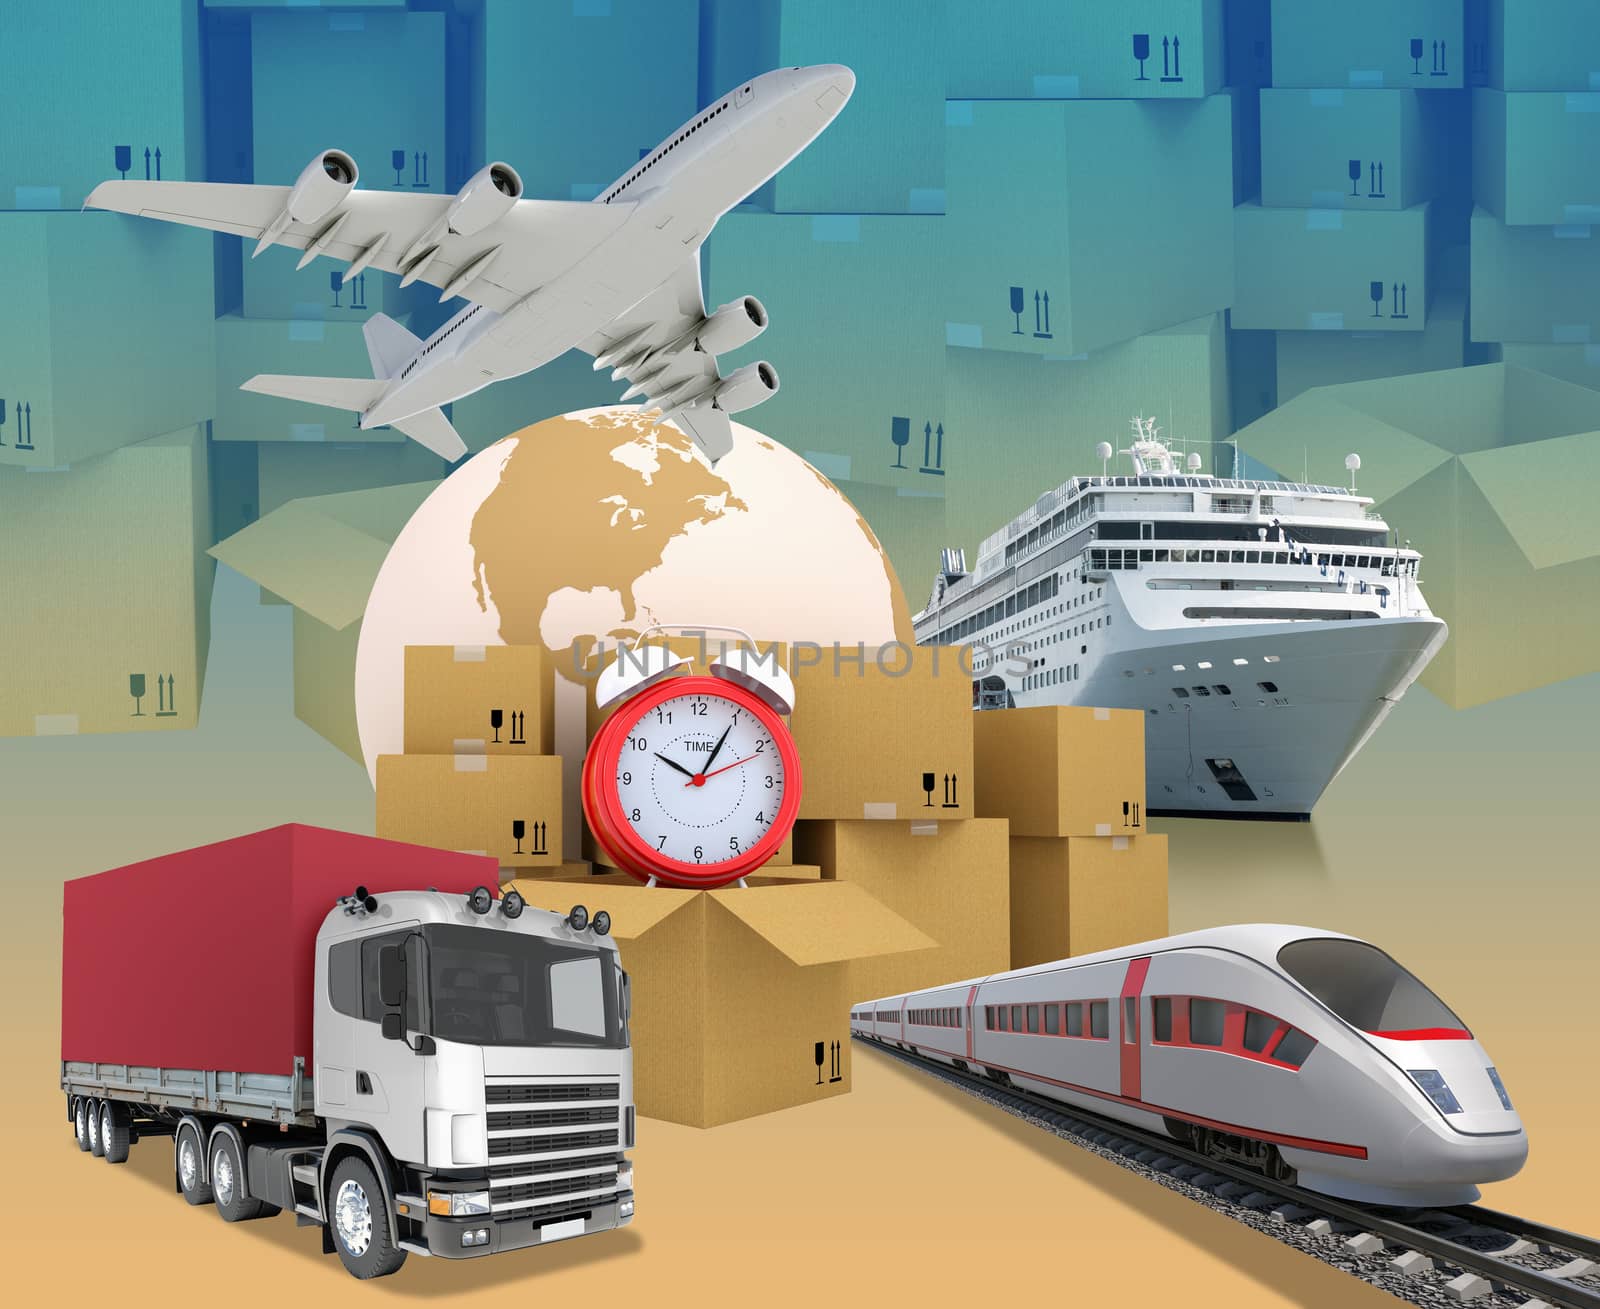 Transport with alarm clock and earth on abstract background with boxes. Elements of this image furnished by NASA